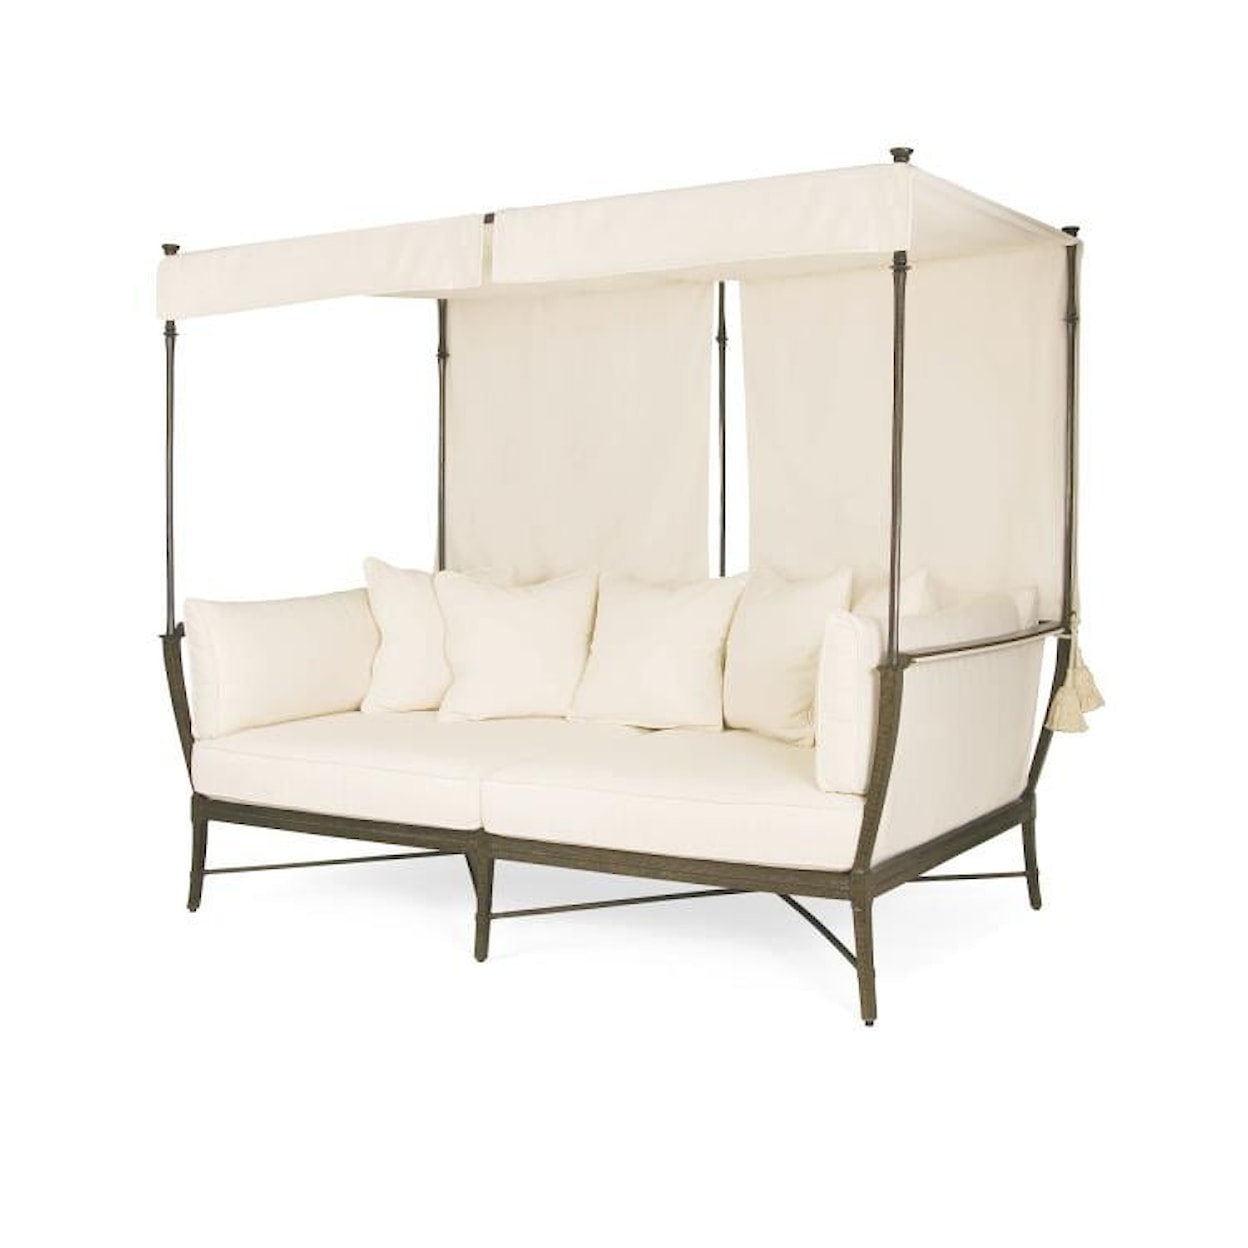 Century Andalusia Outdoor Daybed